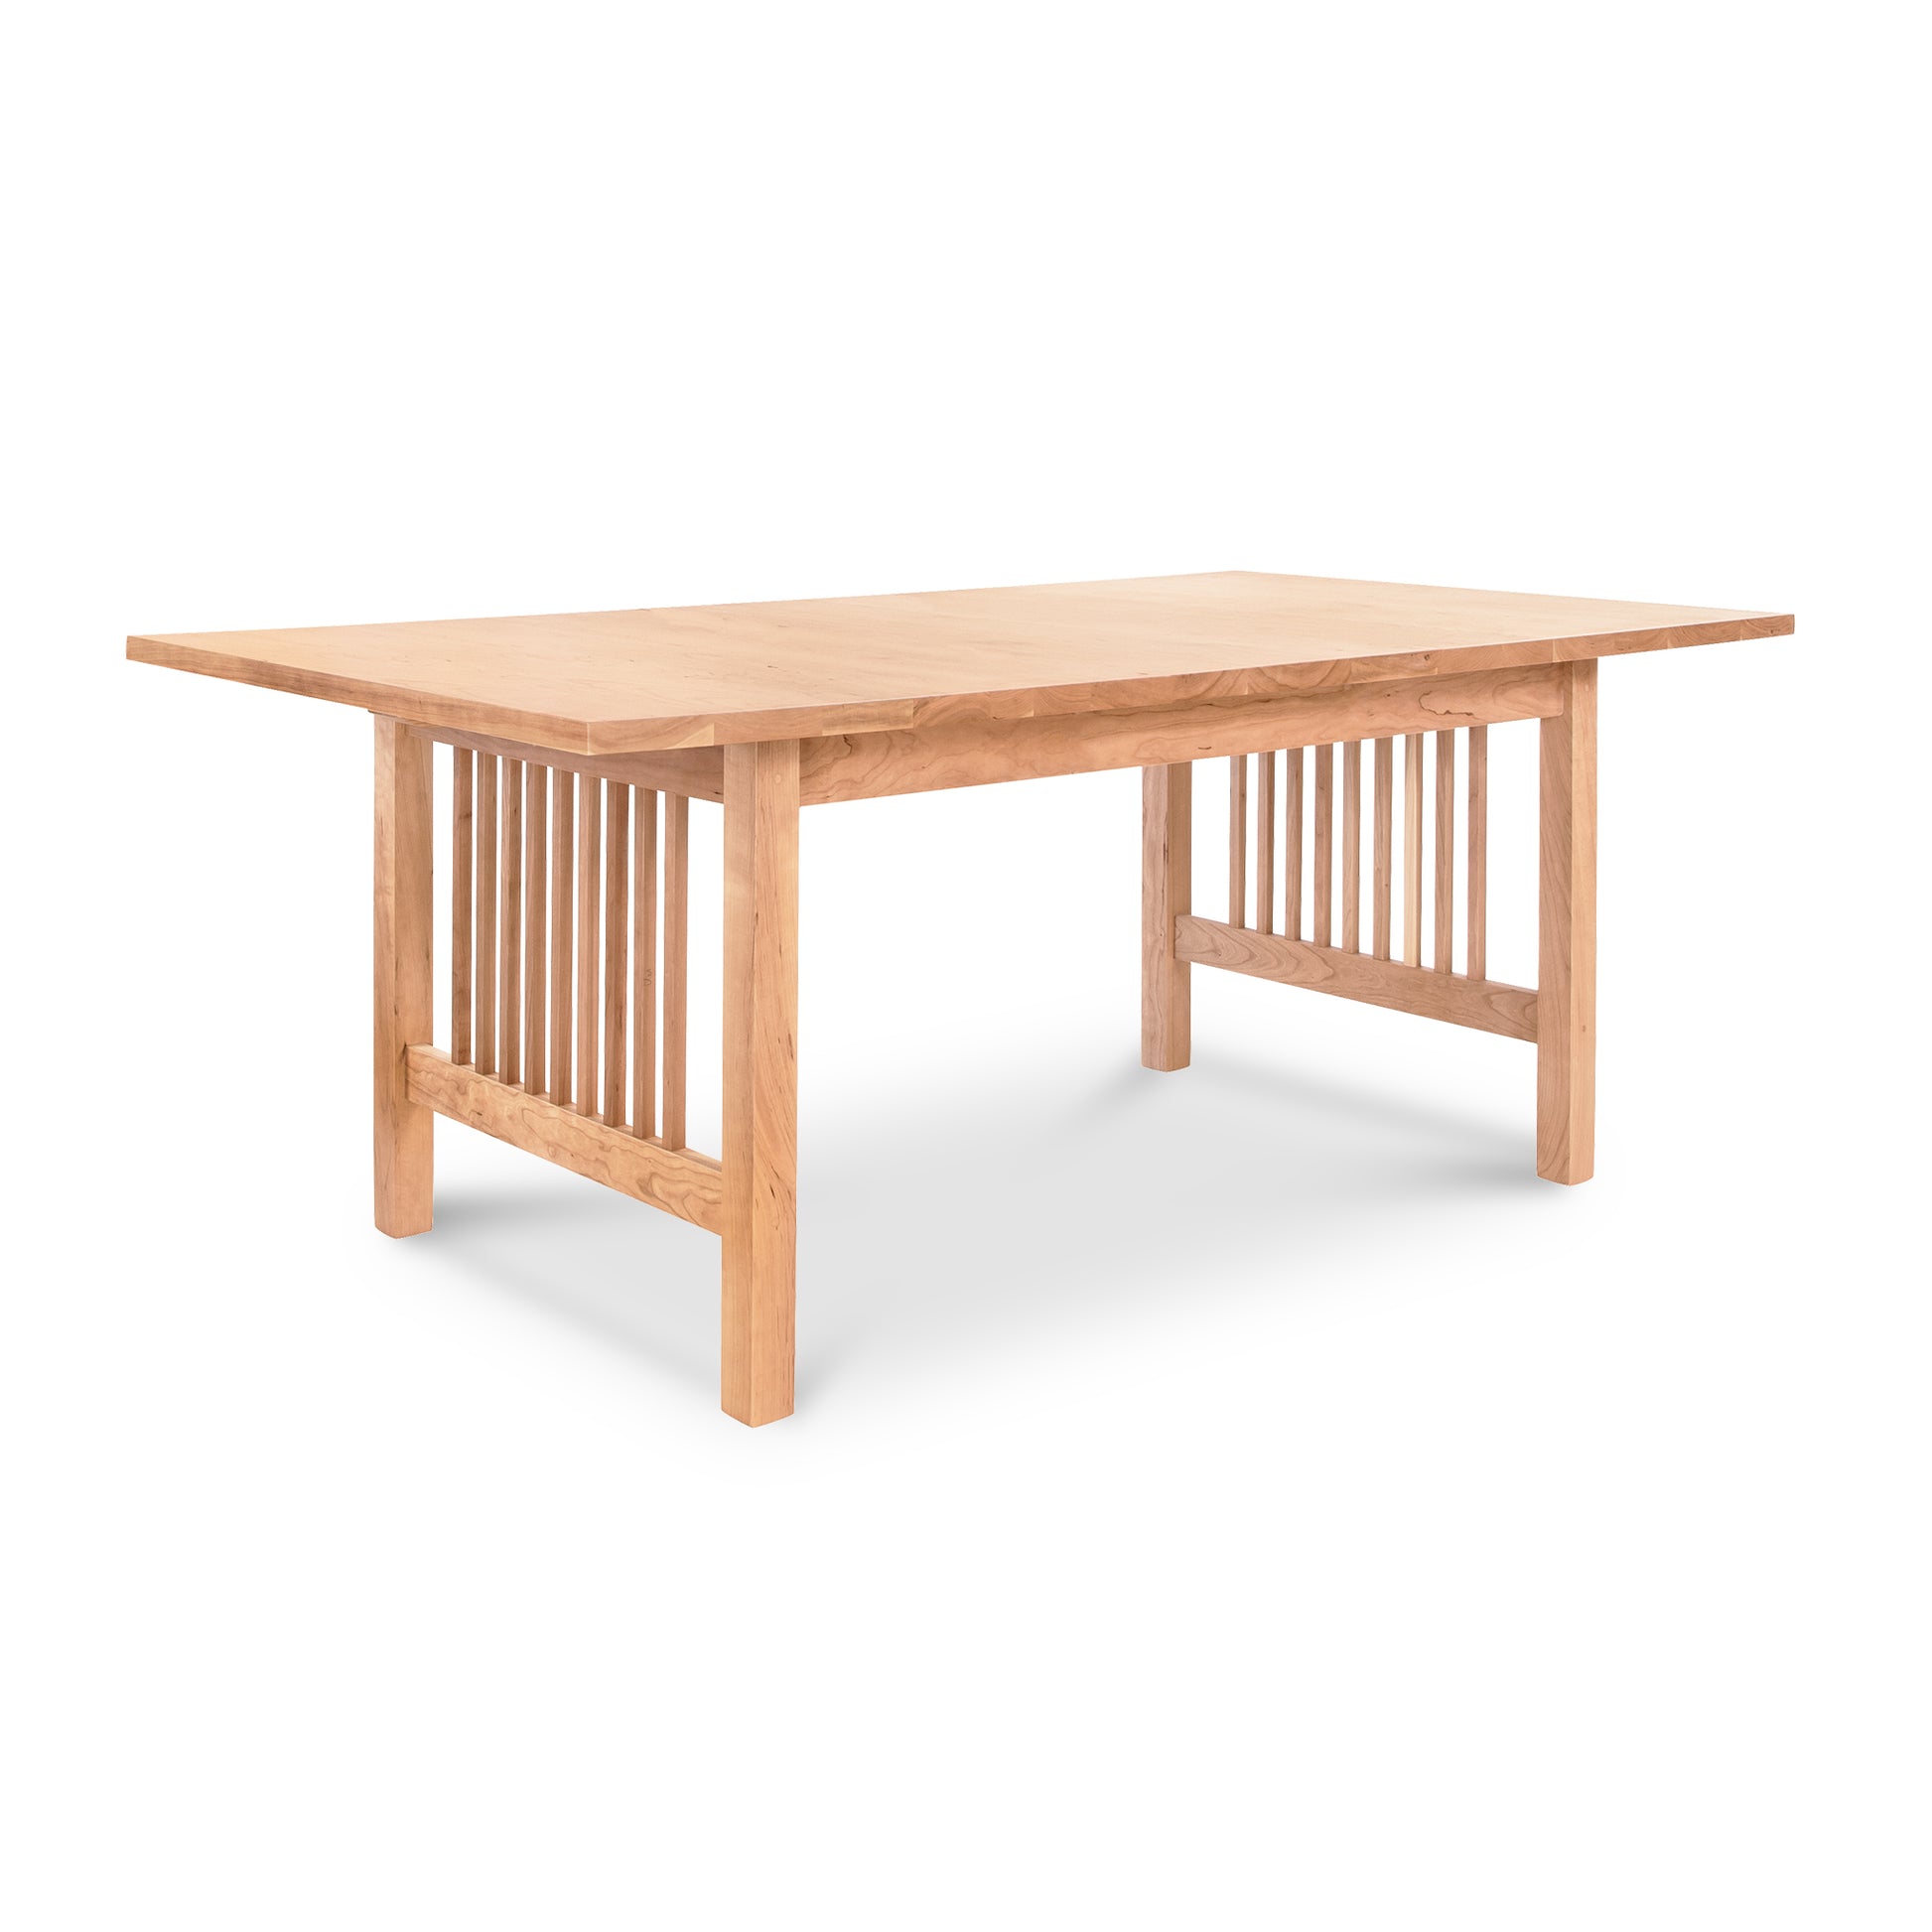 A Lyndon Furniture American Mission Solid Top Dining Table with a traditional design and solid construction.